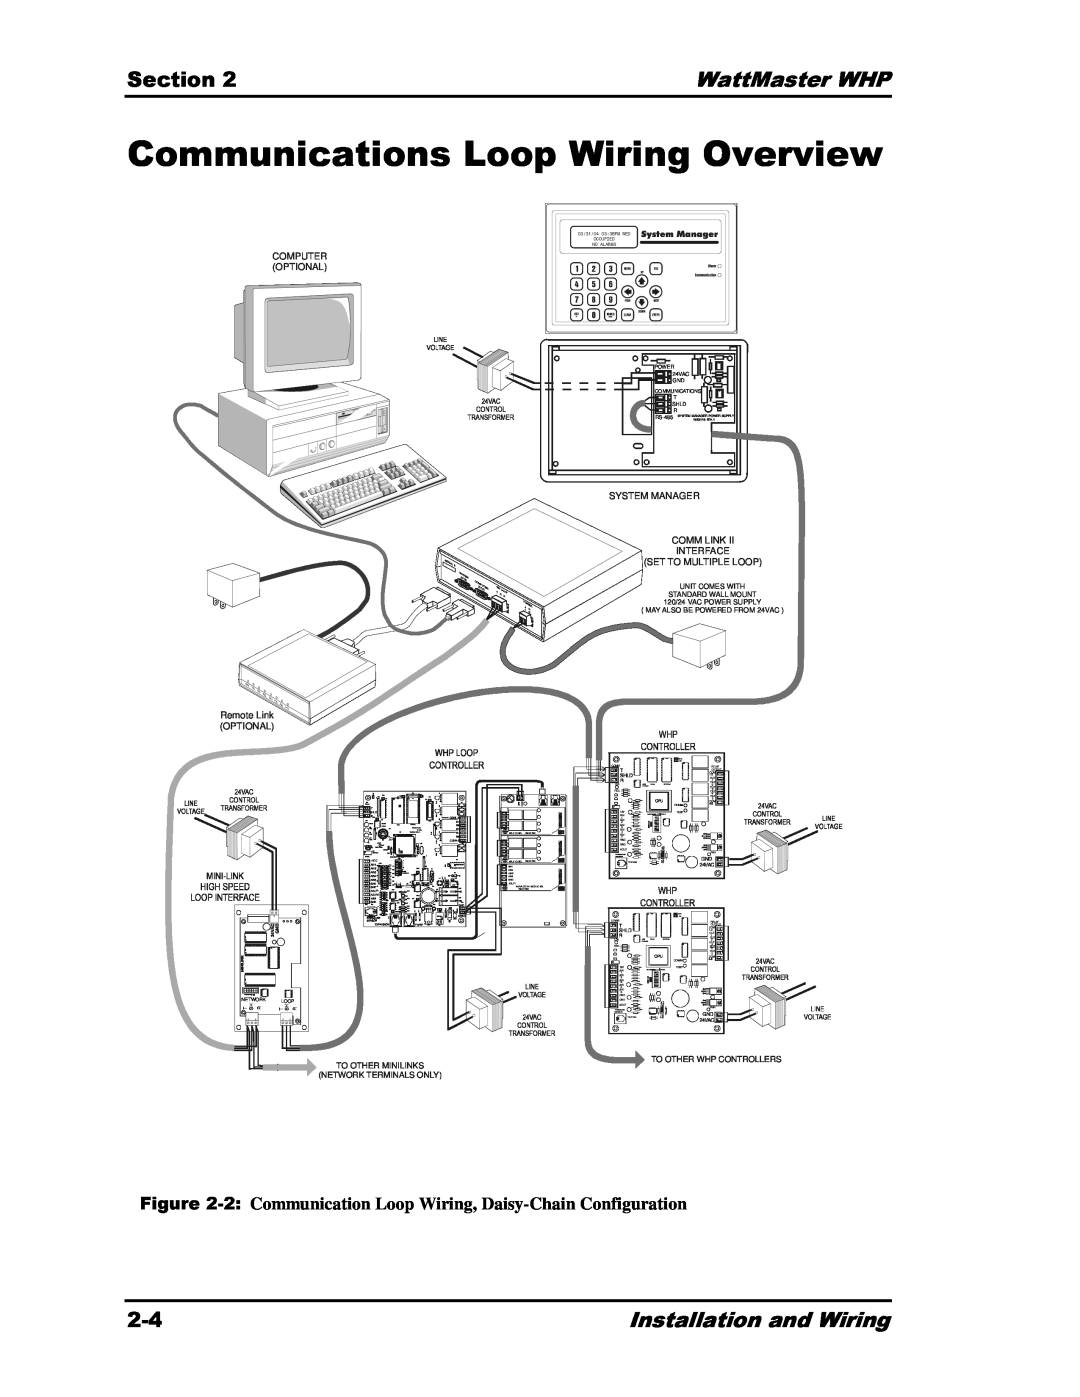 Heat Controller Water Source Heat Pump Communications Loop Wiring Overview, Section, WattMaster WHP, Power, 24VAC, Shld 